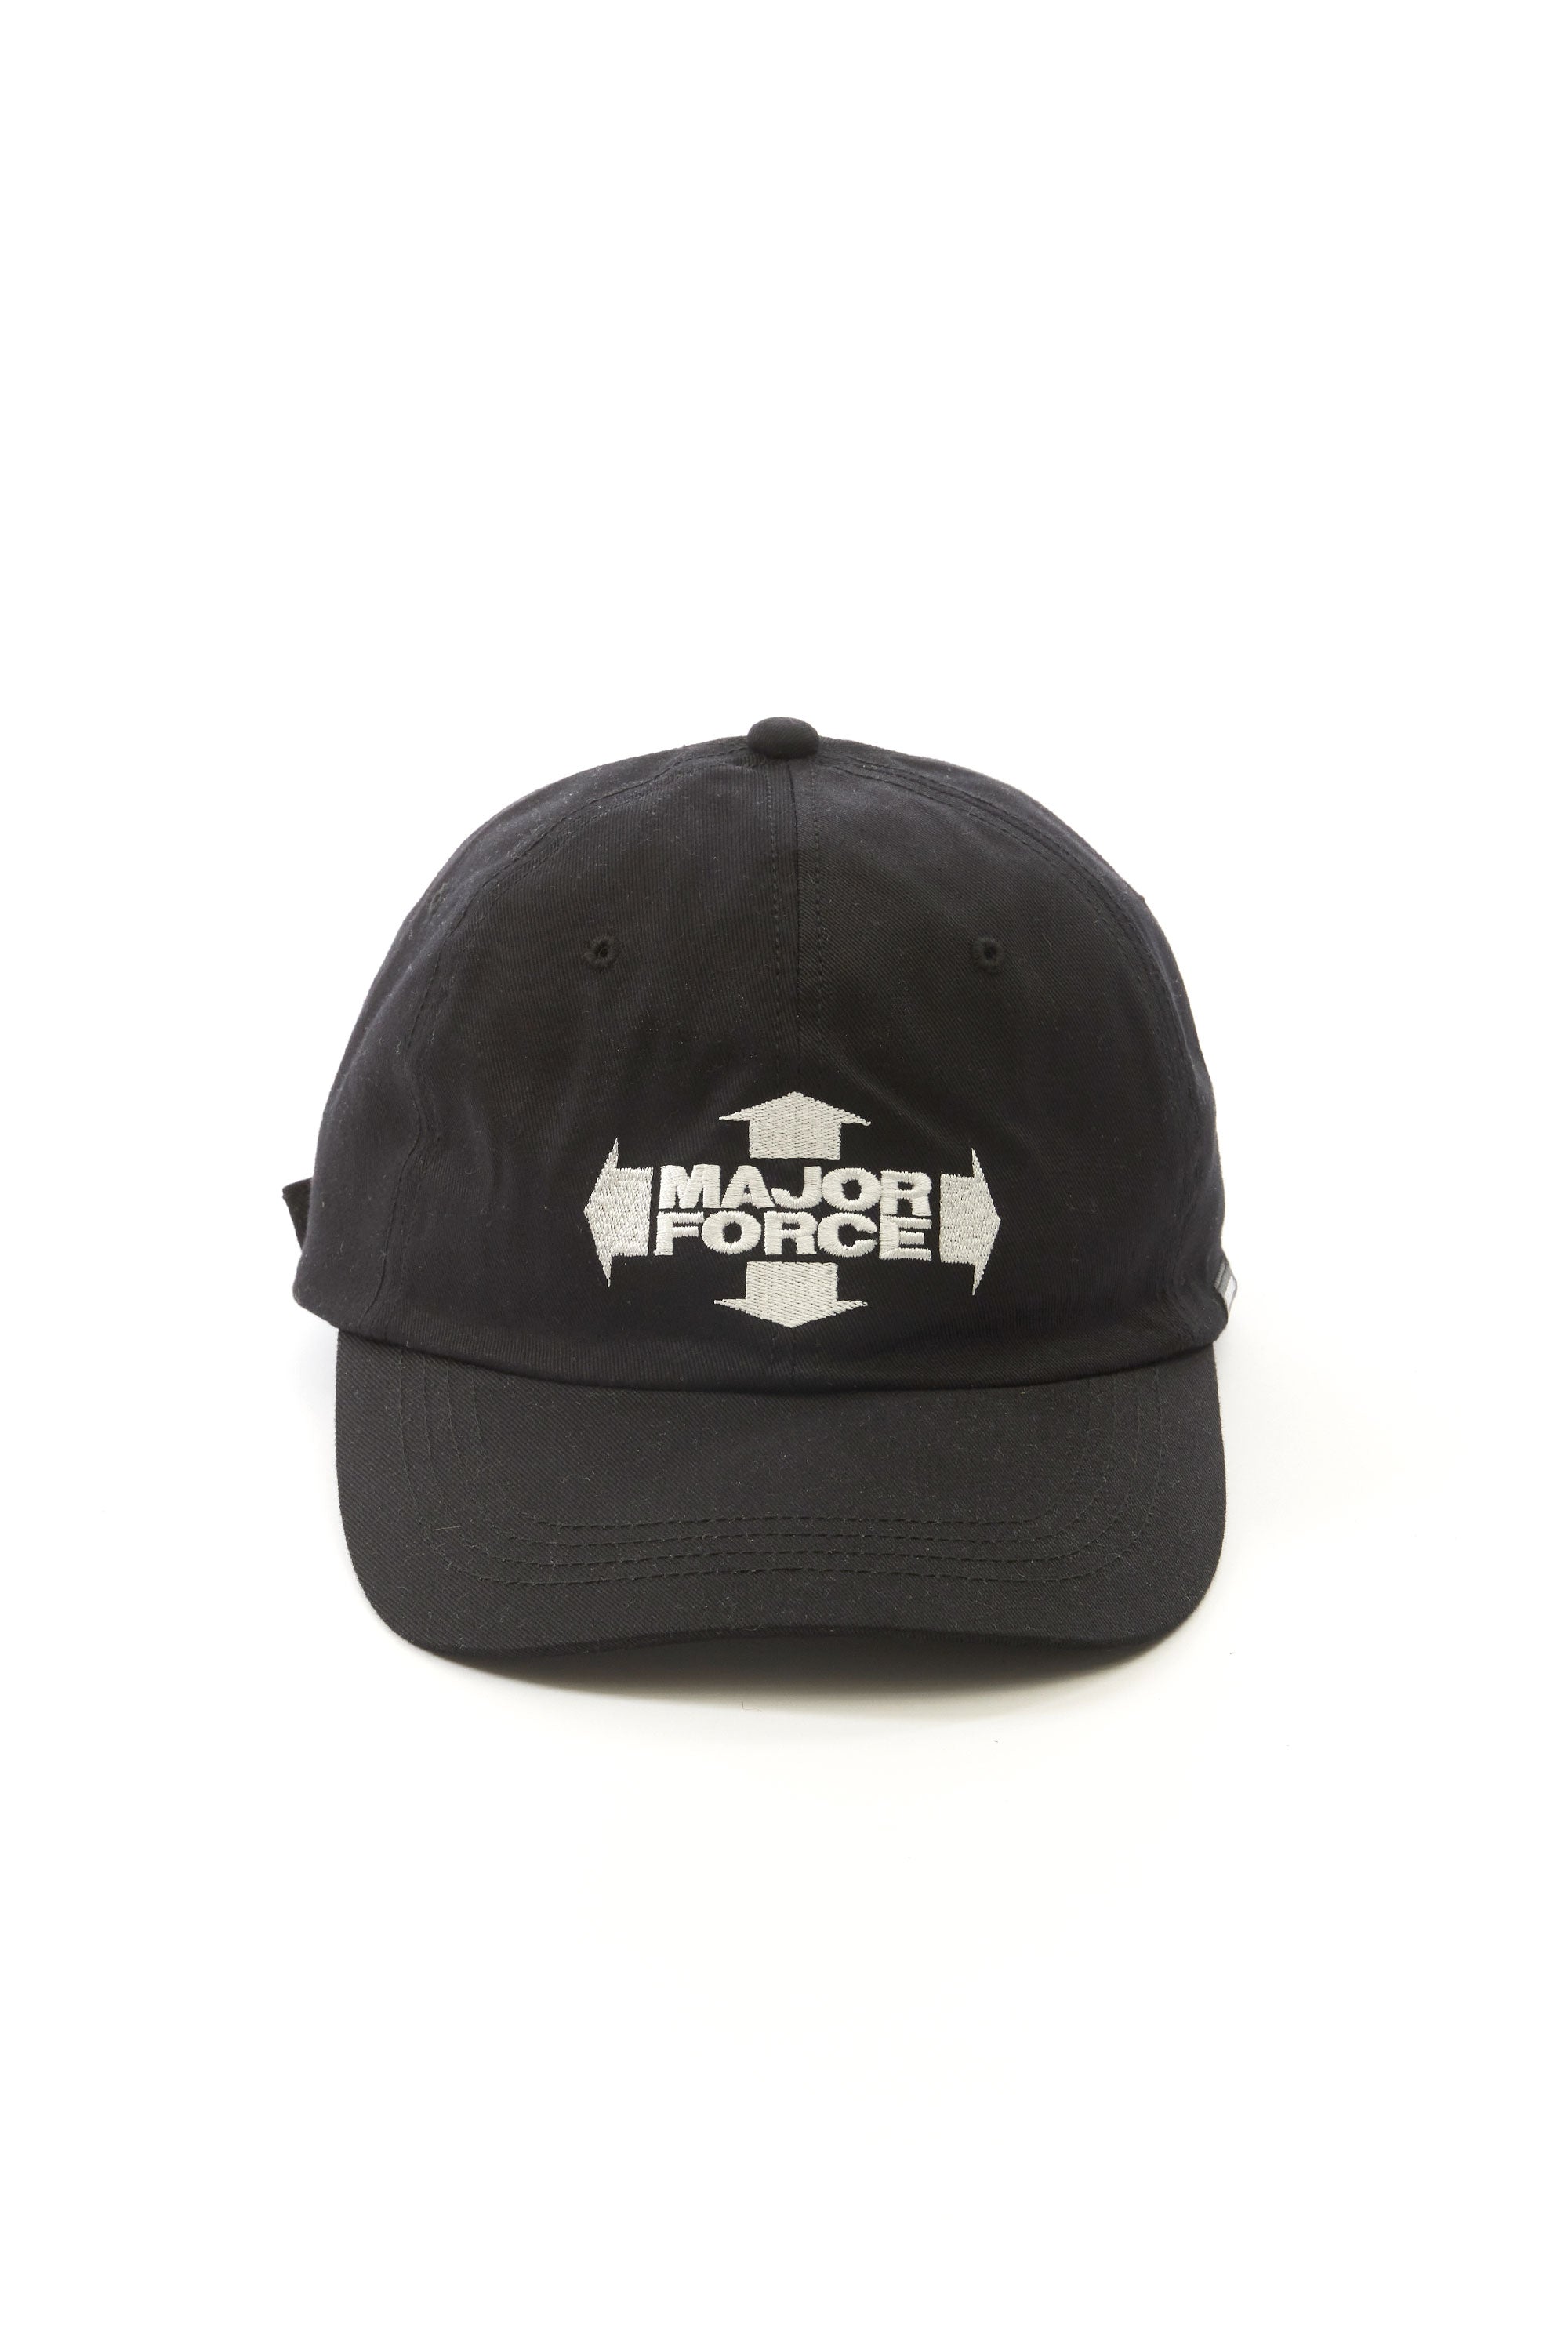 The NEIGHBORHOOD - NH x MAJOR FORCE DAD CAP BLACK available online with global shipping, and in PAM Stores Melbourne and Sydney.